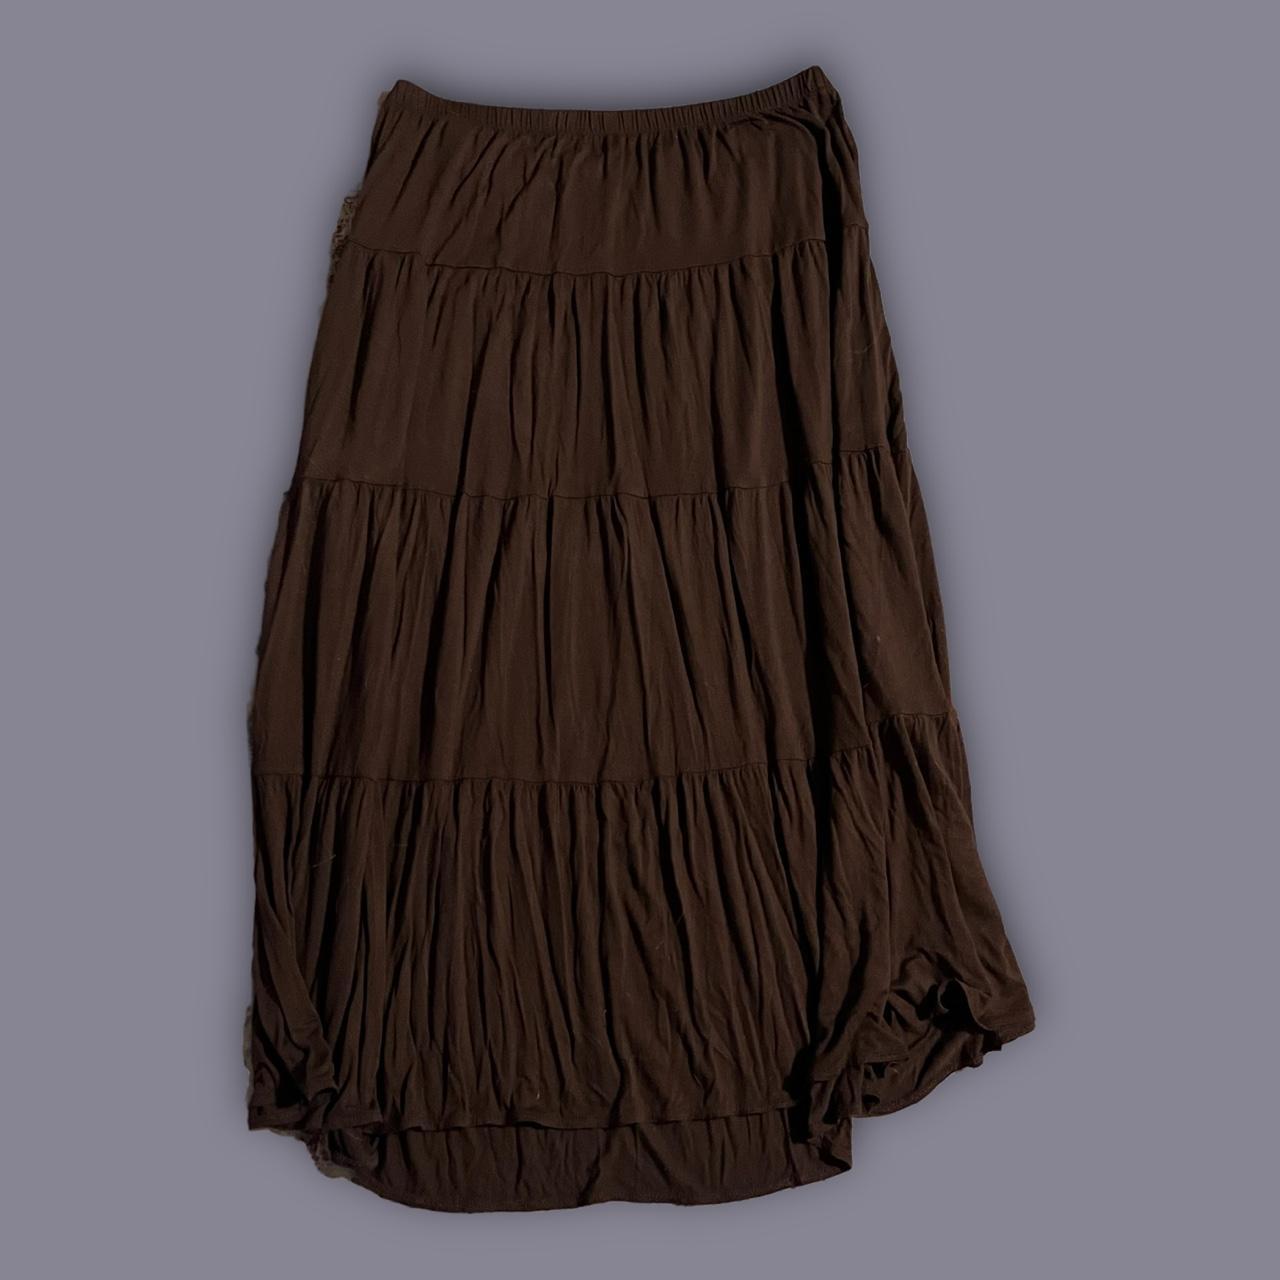 brown tiered maxi skirt 🧸 • perfect fairycore /... - Depop